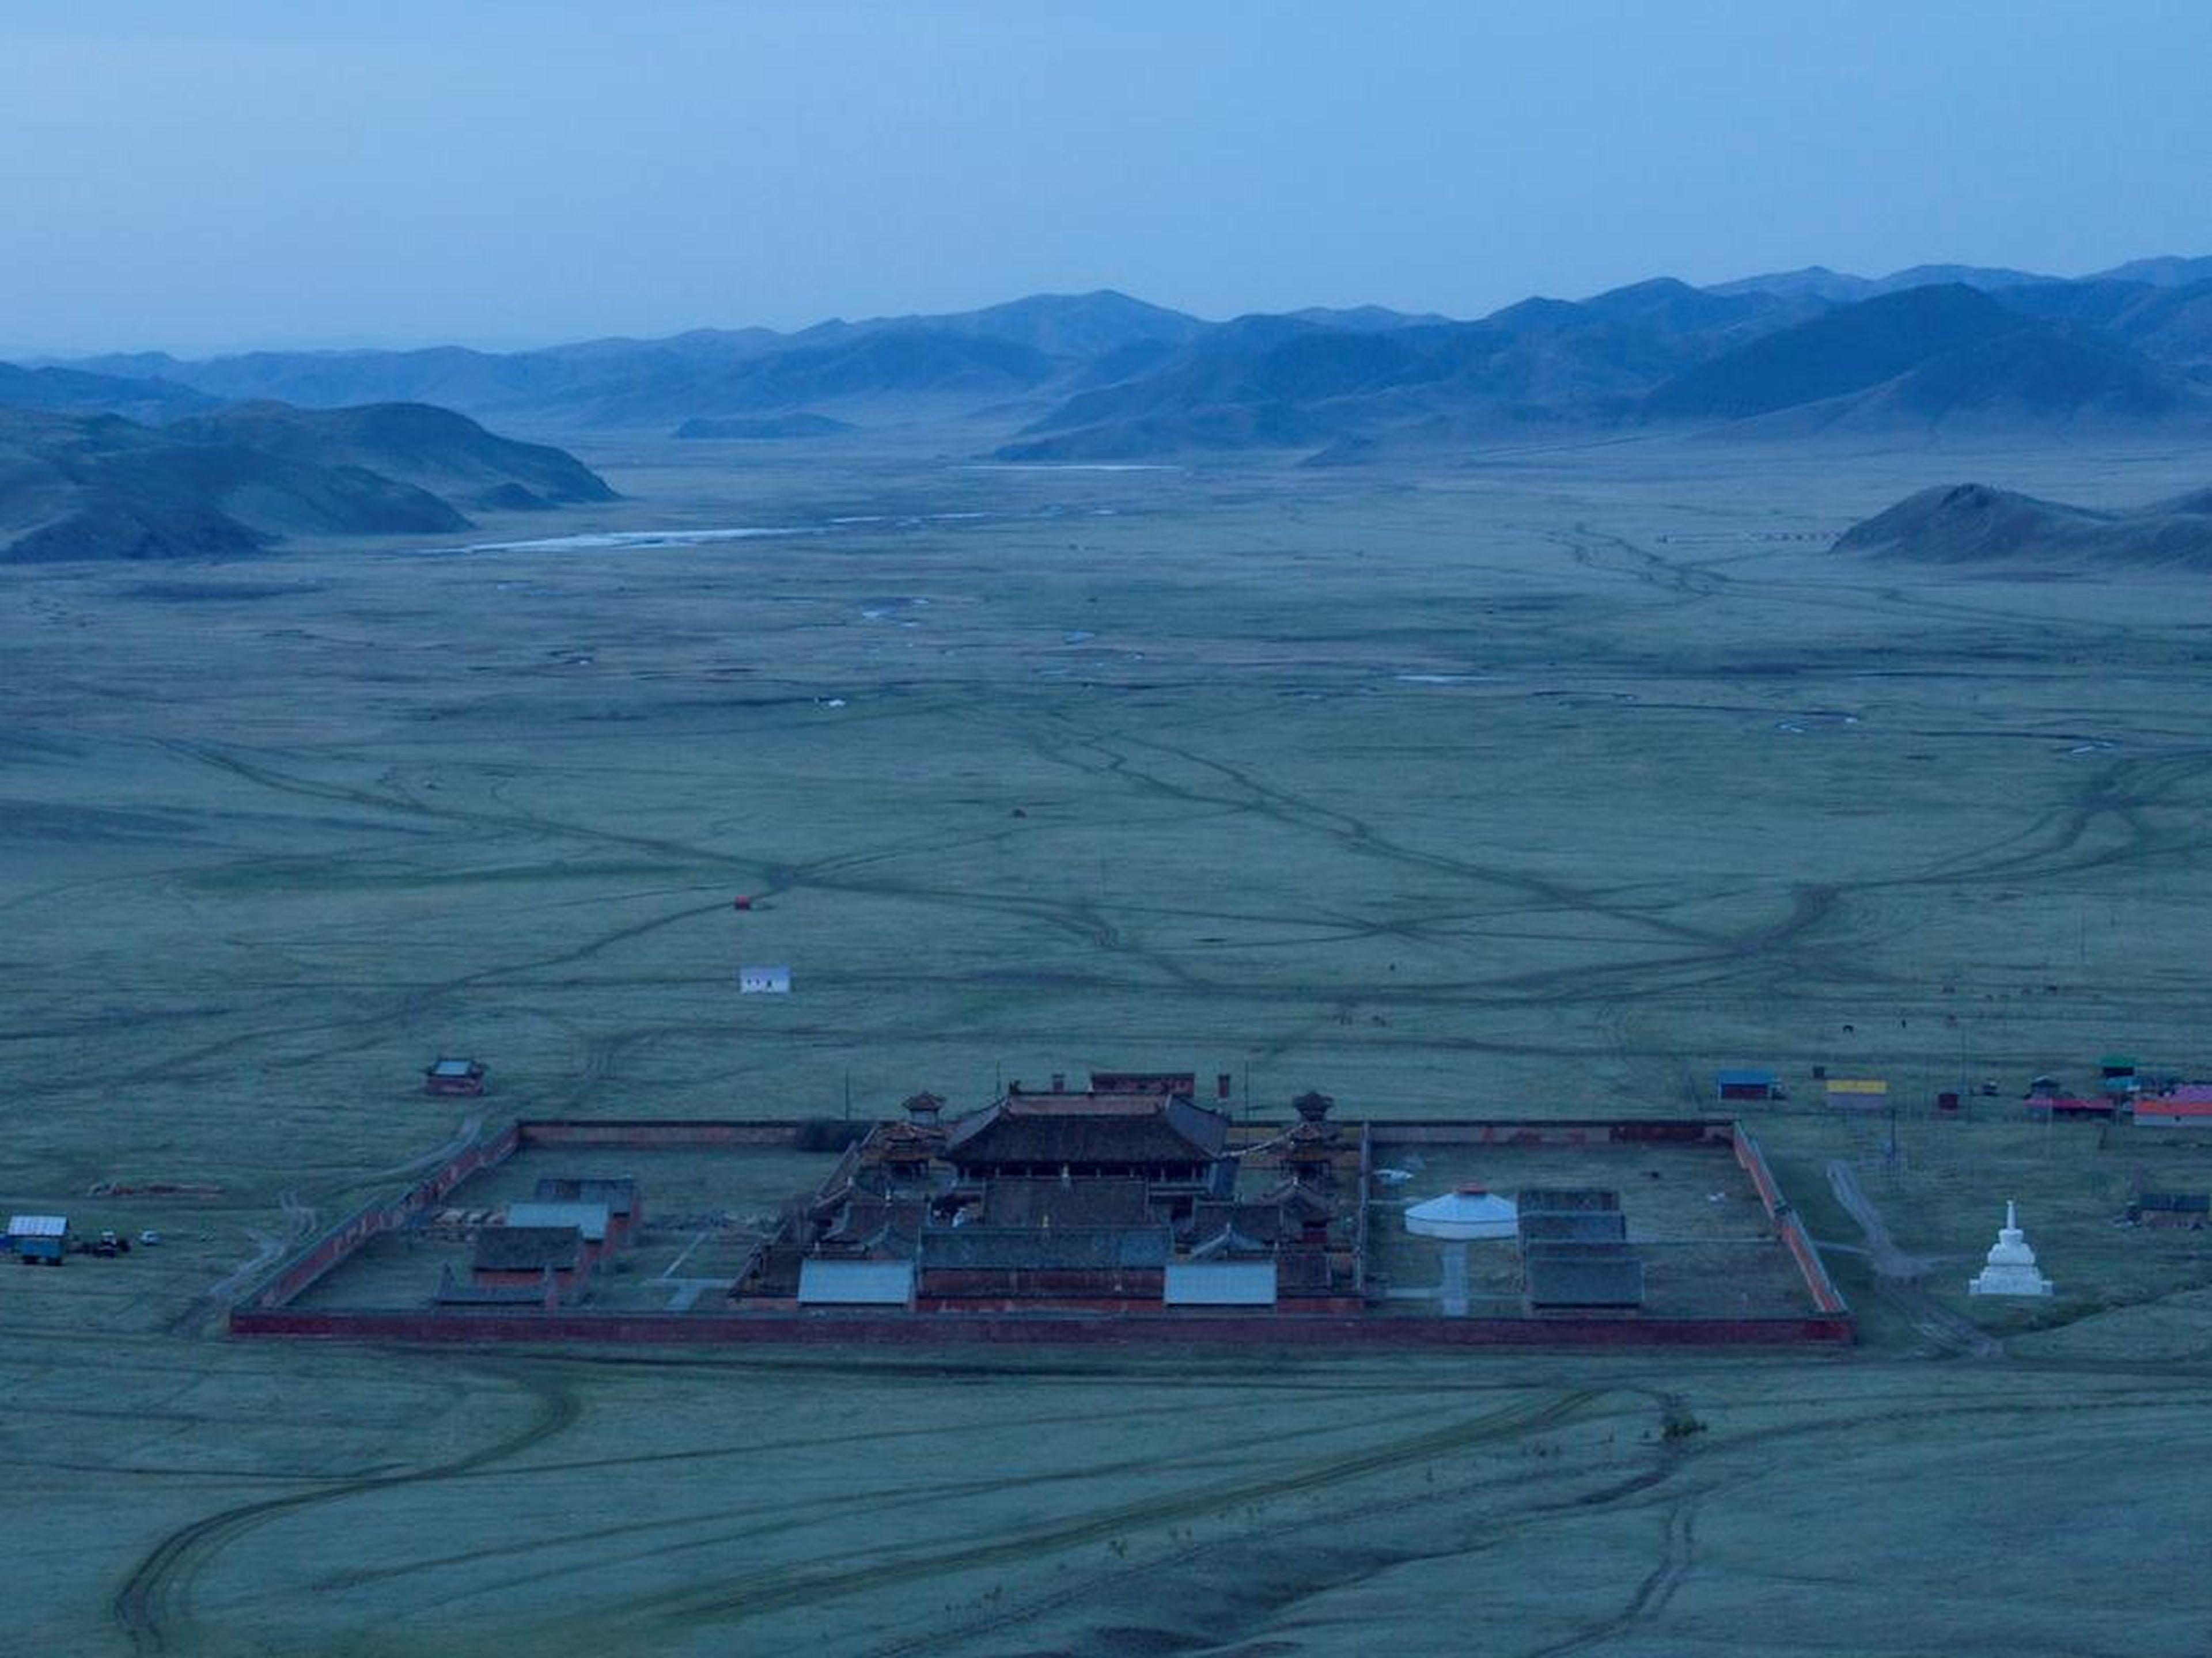 Located in the seemingly endless grasslands of northern Mongolia, the monastery is struggling to attract and retain students.